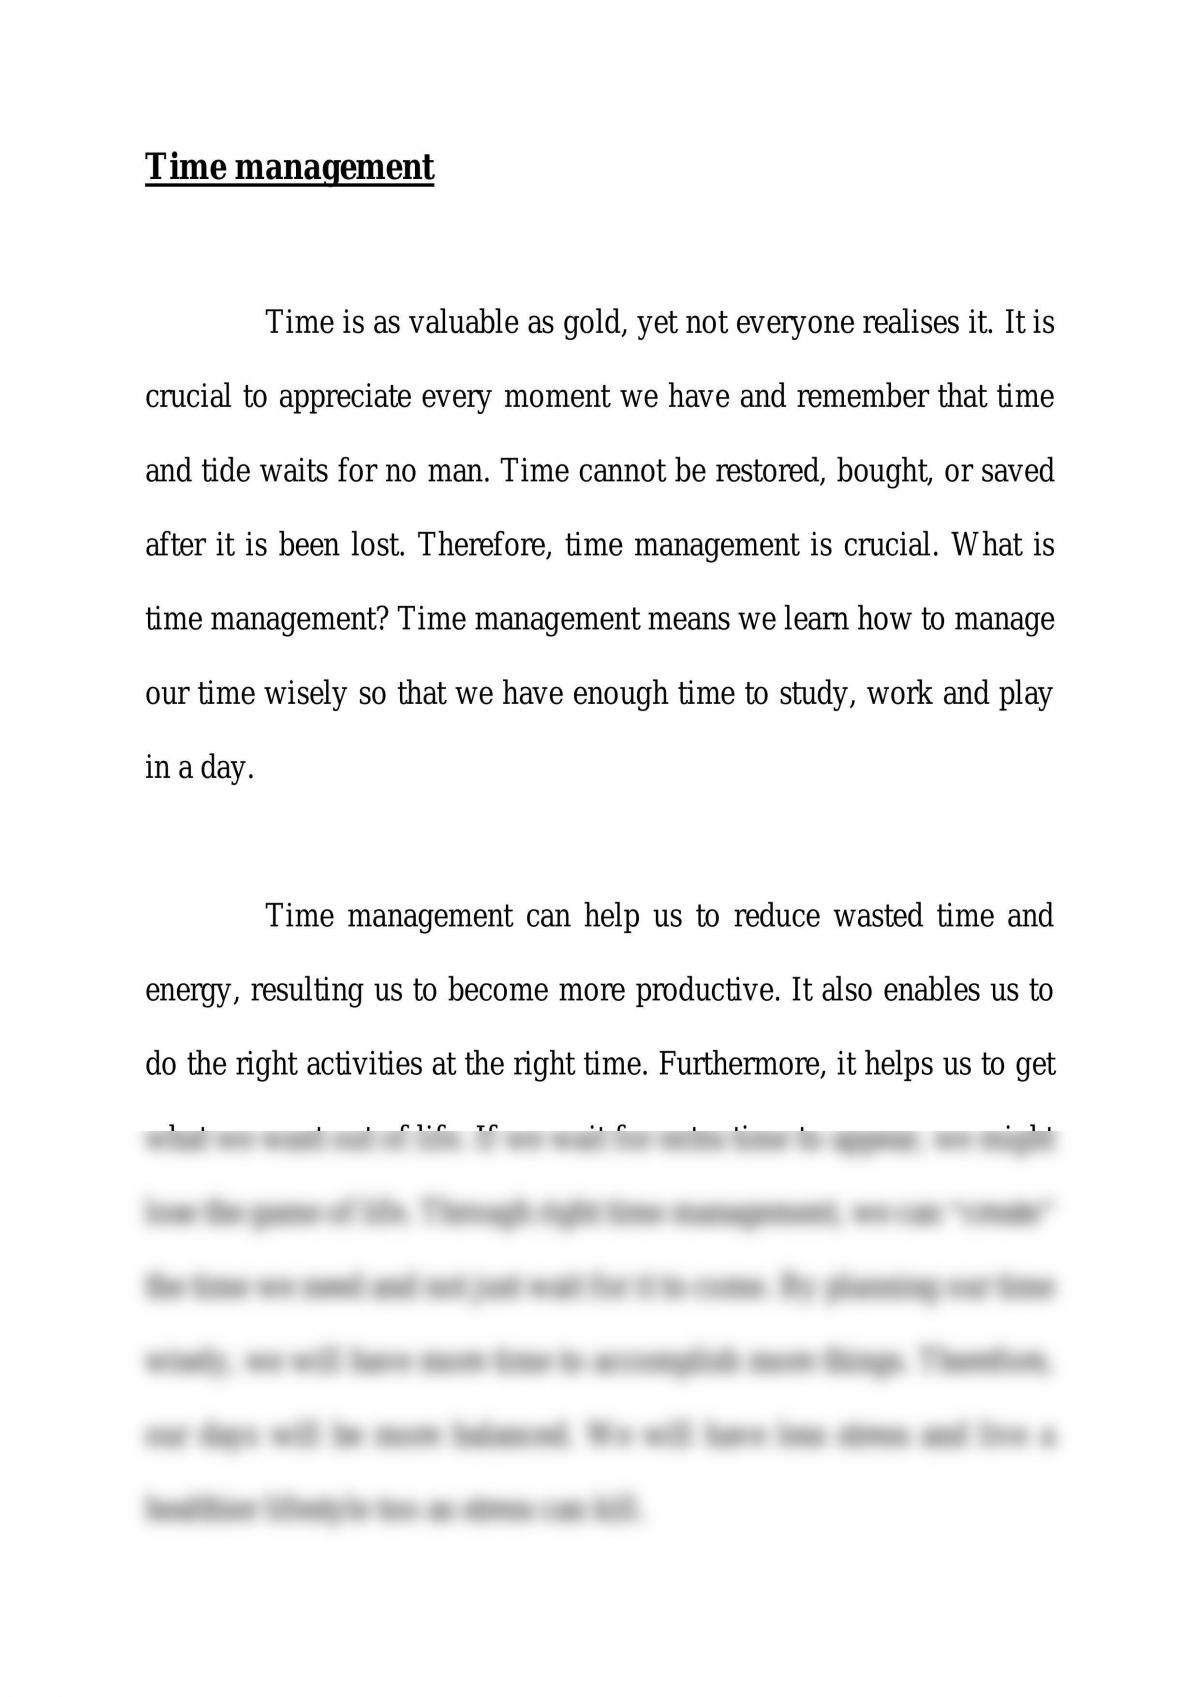 essay on management of time